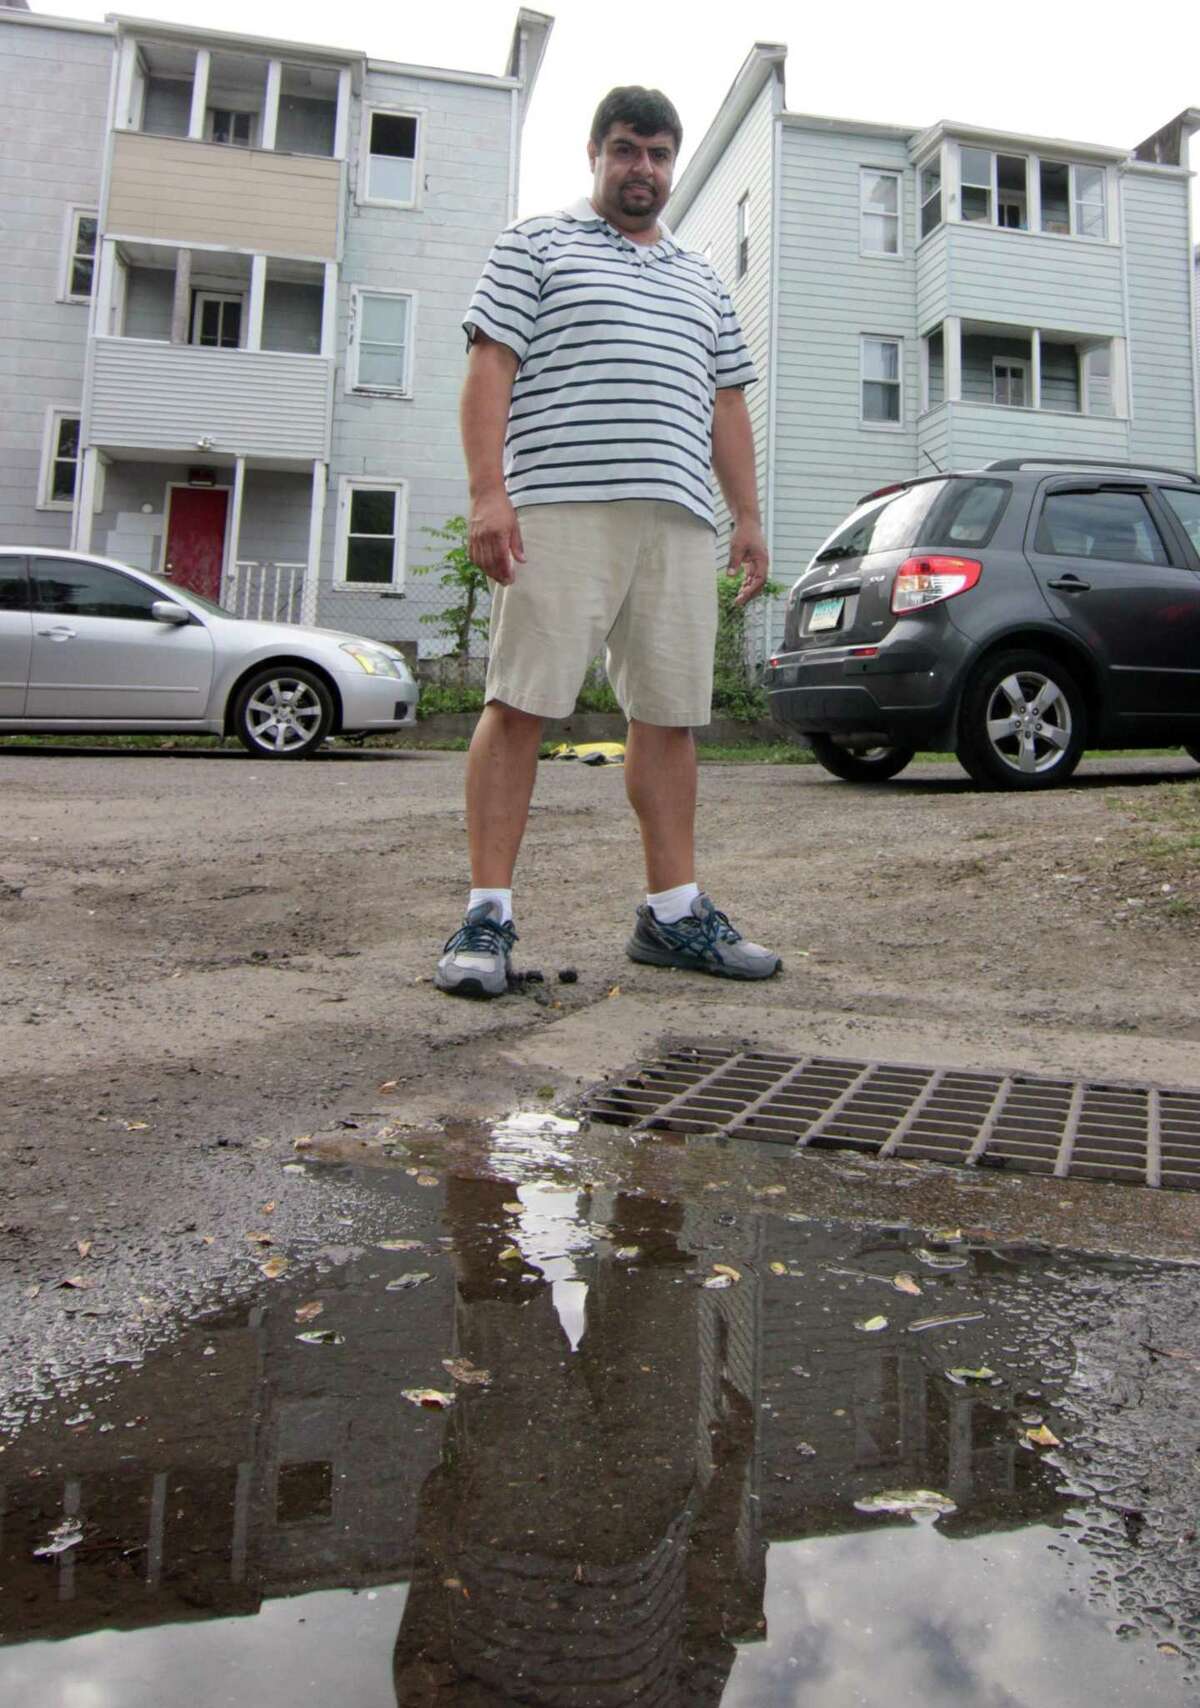 Wallace Court resident Pedro Quiroga stands near a drain that constantly backs up and floods the whole street in Bridgeport, Conn., on Tuesday Oct. 9, 2018. Many homes in the neighborhood were damaged by the flooding, including Quiroga's, after a heavy rainstorm on Tuesday Oct. 2, 2018.